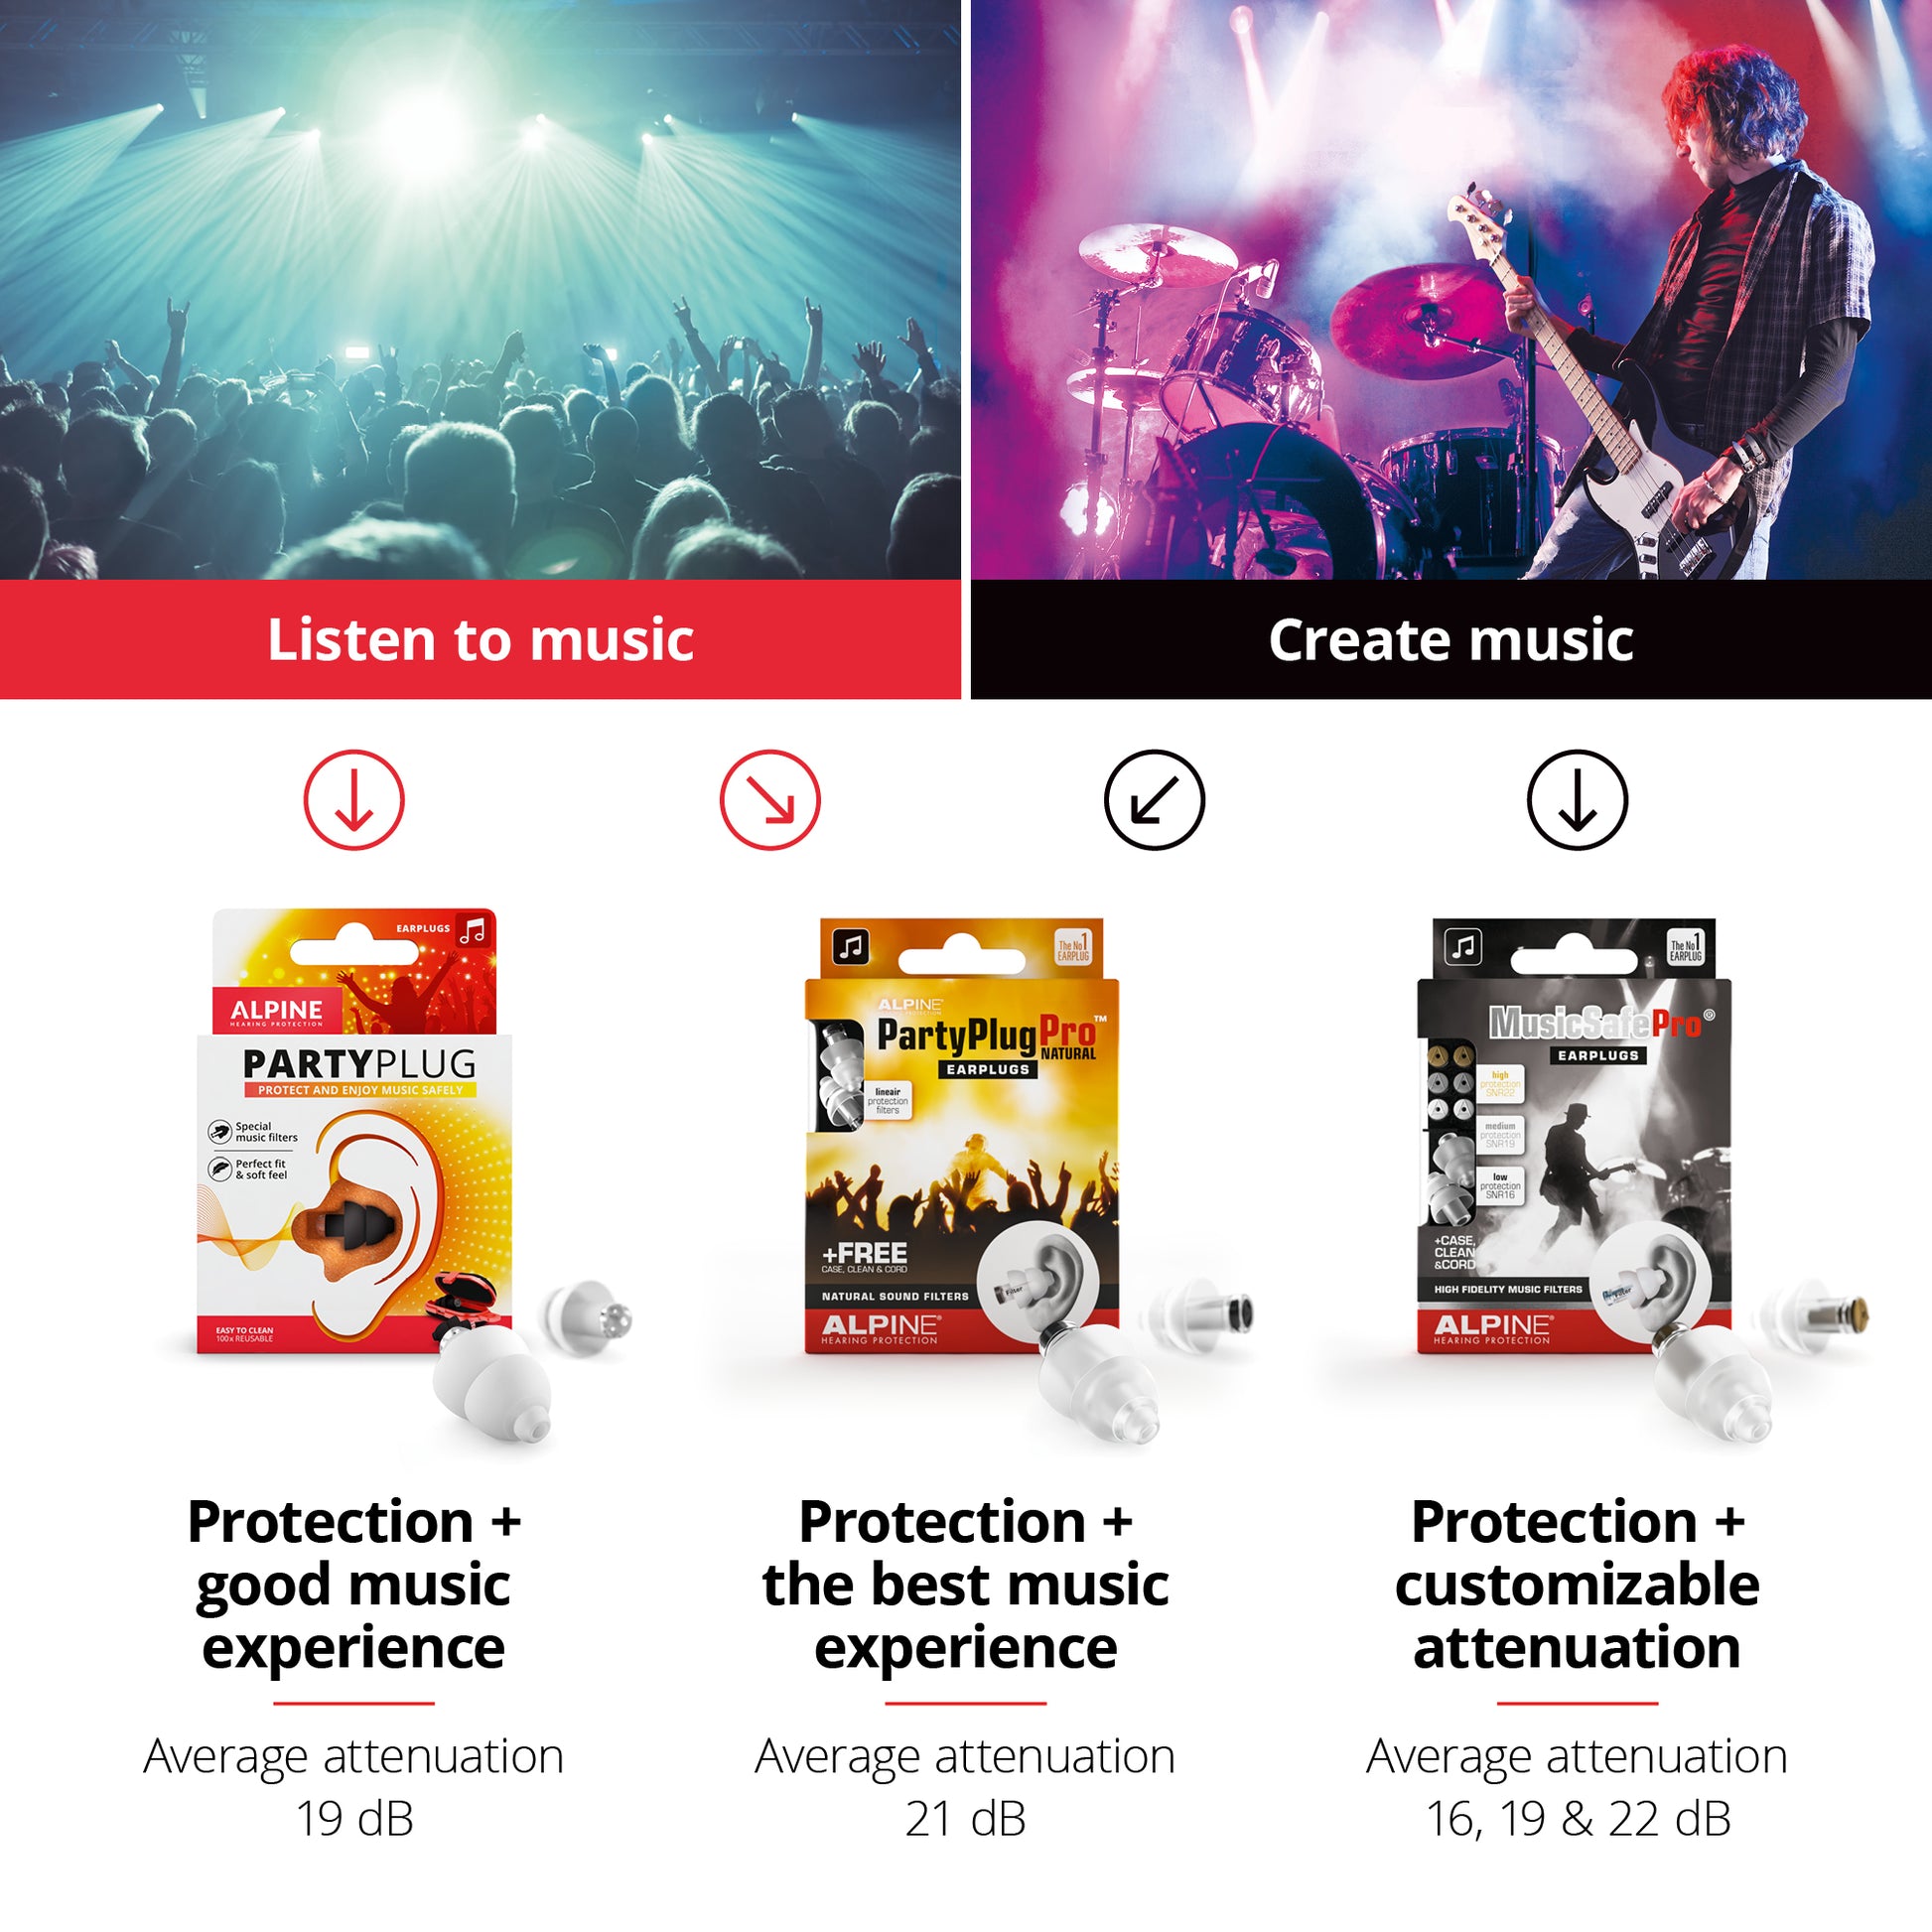 Alpine PartyPlug for festival and partying – Alpine Hearing Protection